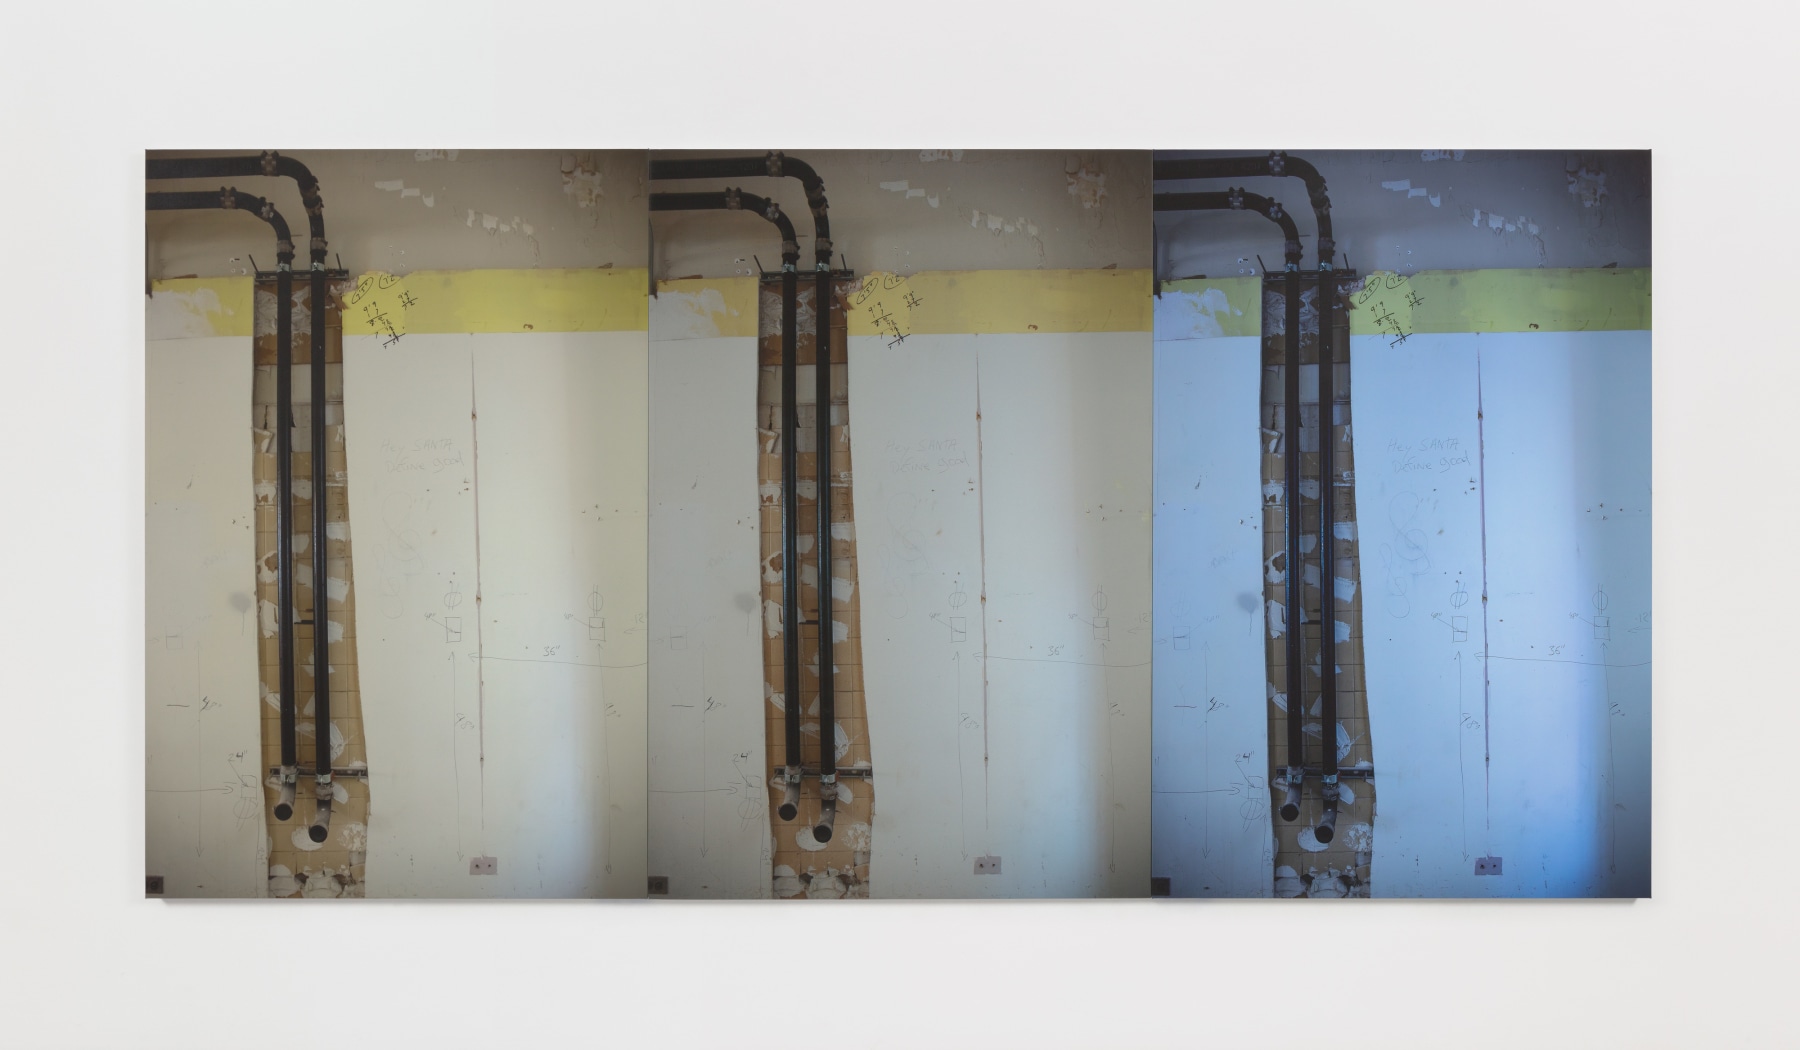 A photograph of exposed pipes in a wall surrounding by written demolition plans and graffiti repeated three times with different exposure.